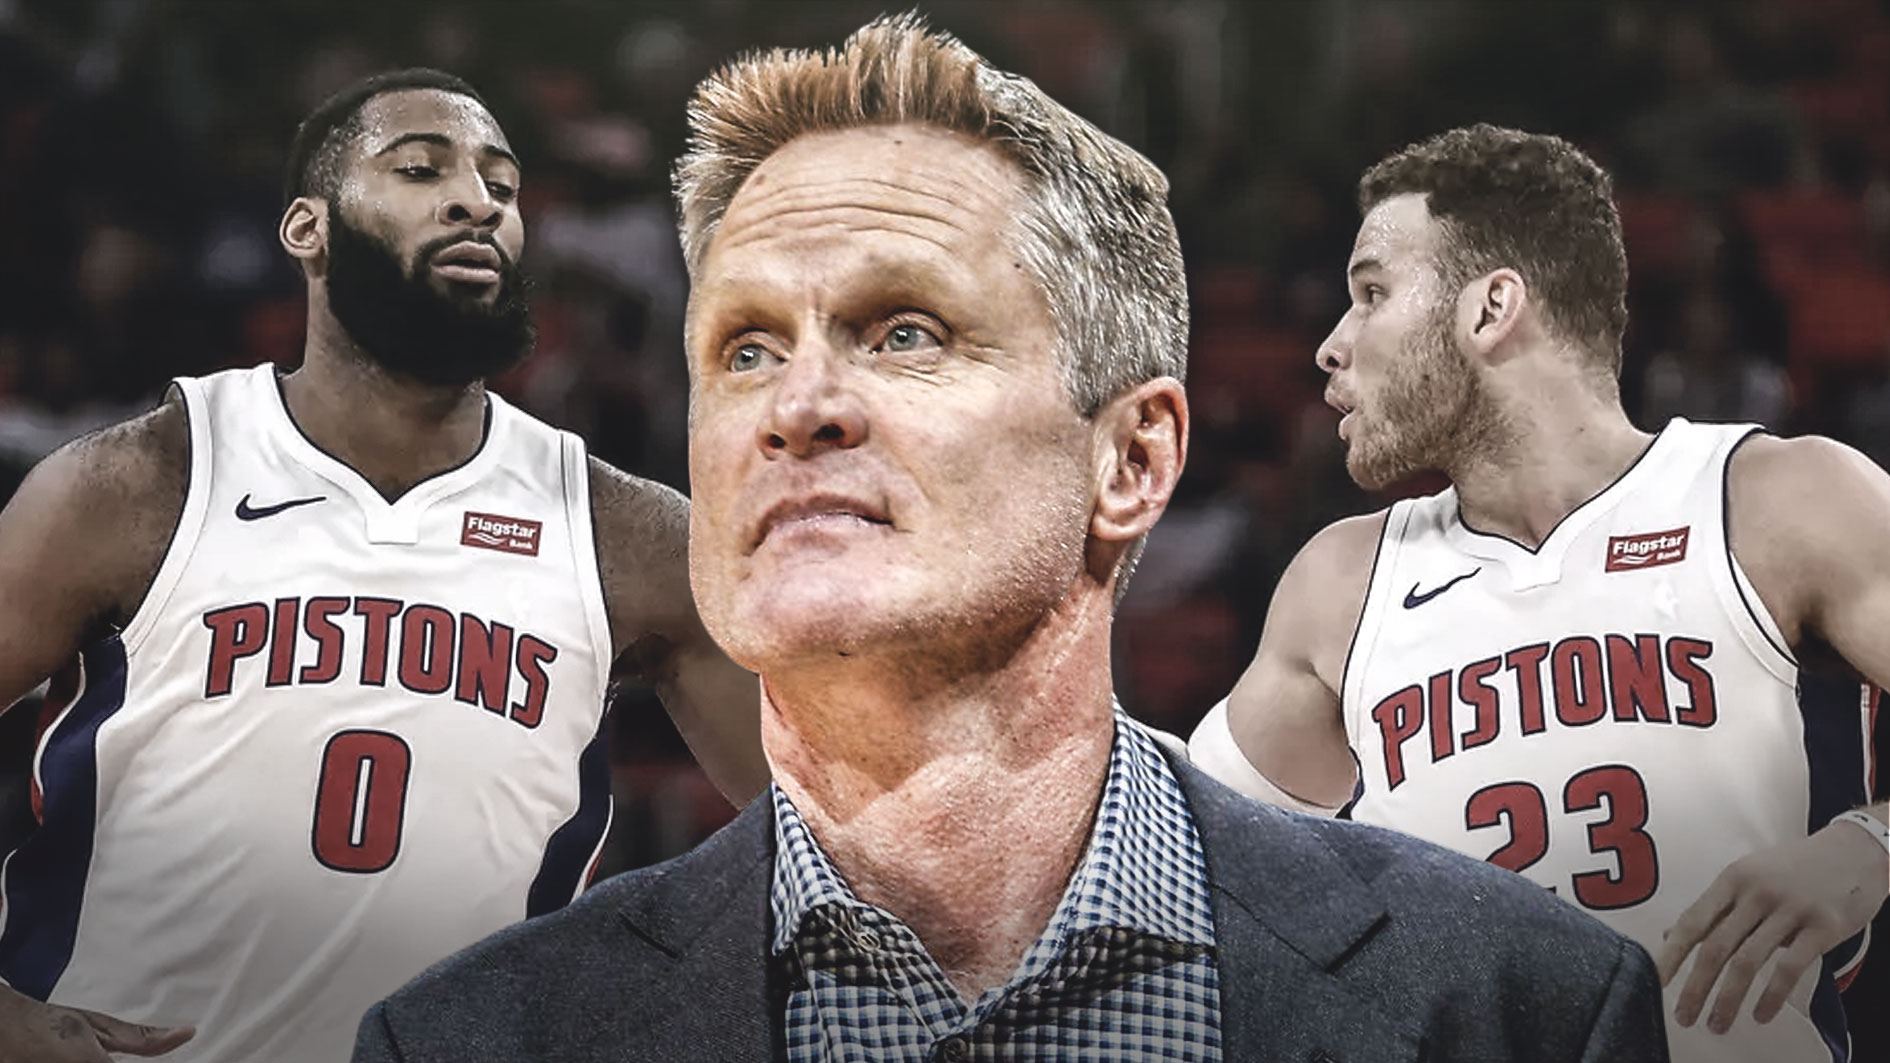 Steve-Kerr-calls-Pistons-game-as-one-of-his-worst-performances-as-a-coach